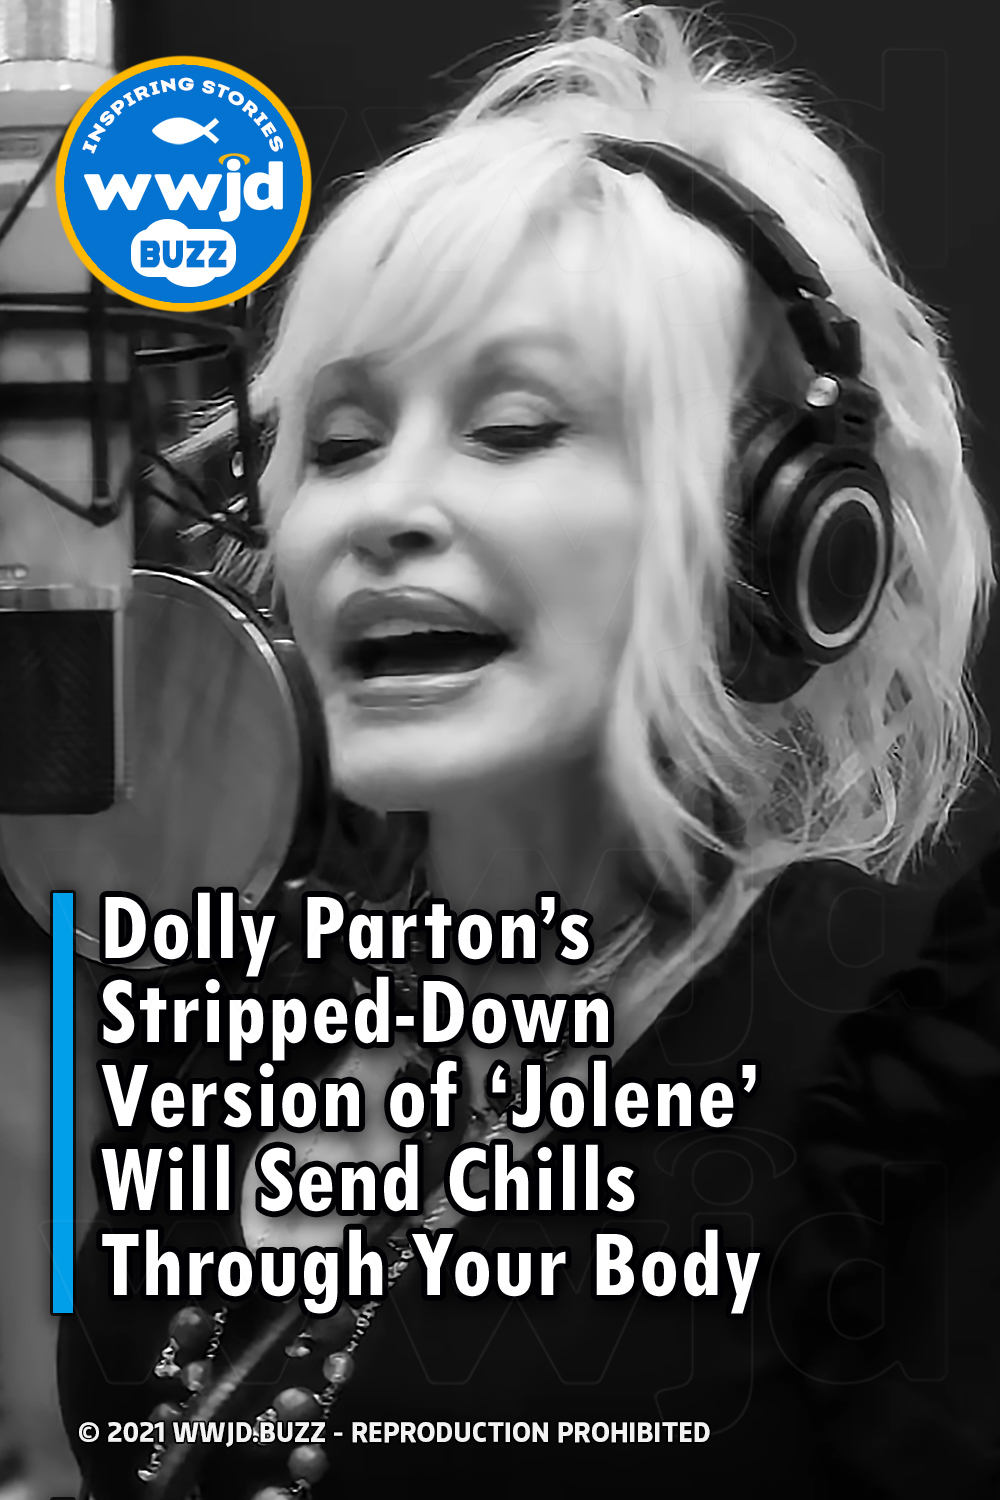 Dolly Parton\'s Stripped-Down Version of ‘Jolene’ Will Send Chills Through Your Body